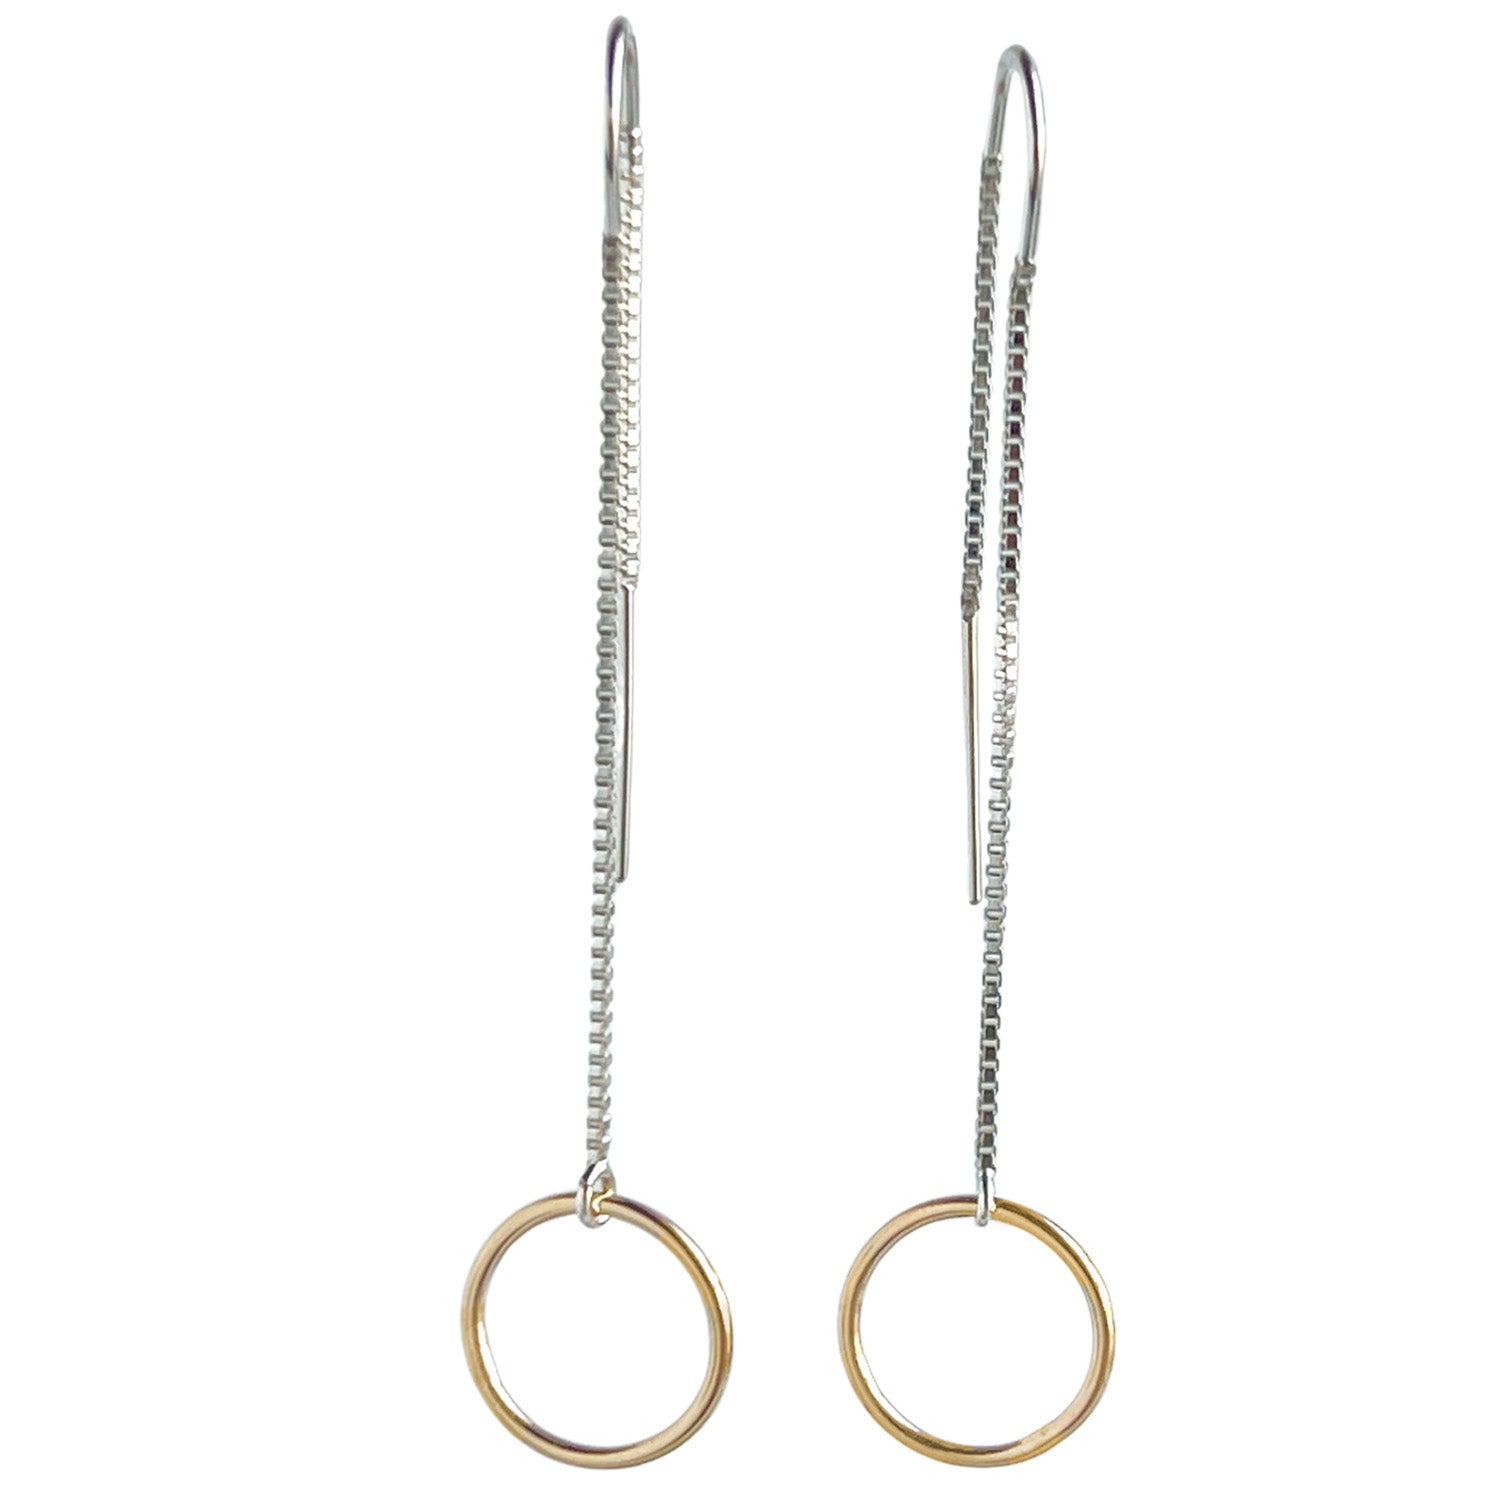 Mixed metal long dangle threader earrings threader is sterling silver and small ring  is 12mm 14k gold filled